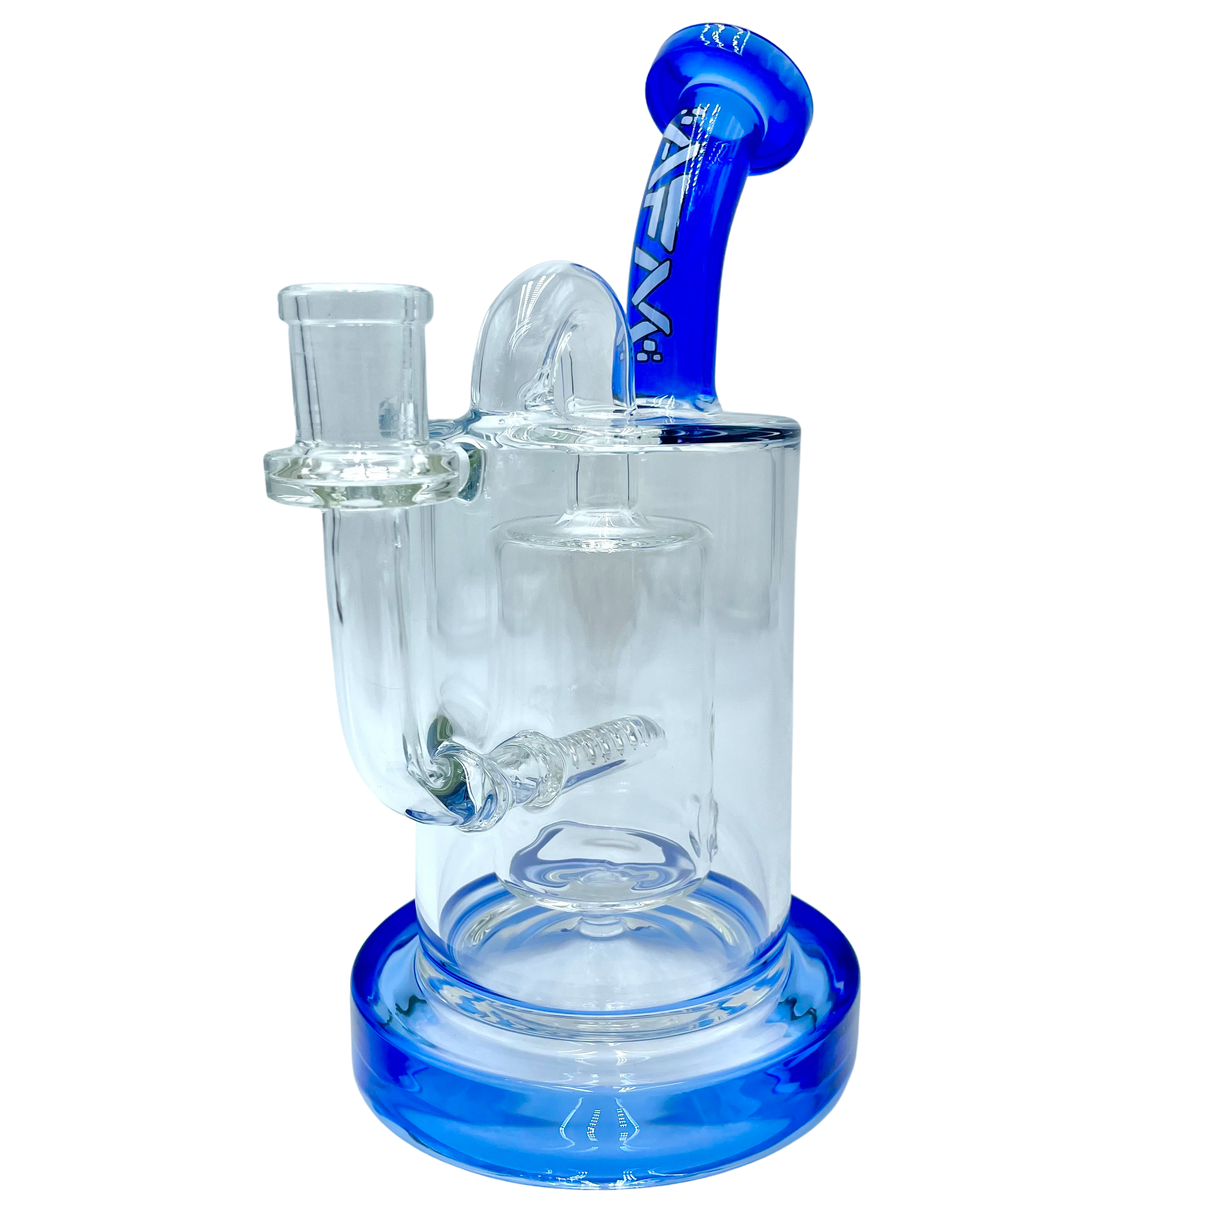 AFM The Pump Recycler 8" Dab Rig with Blue Accents and In-Line Percolator, Front View